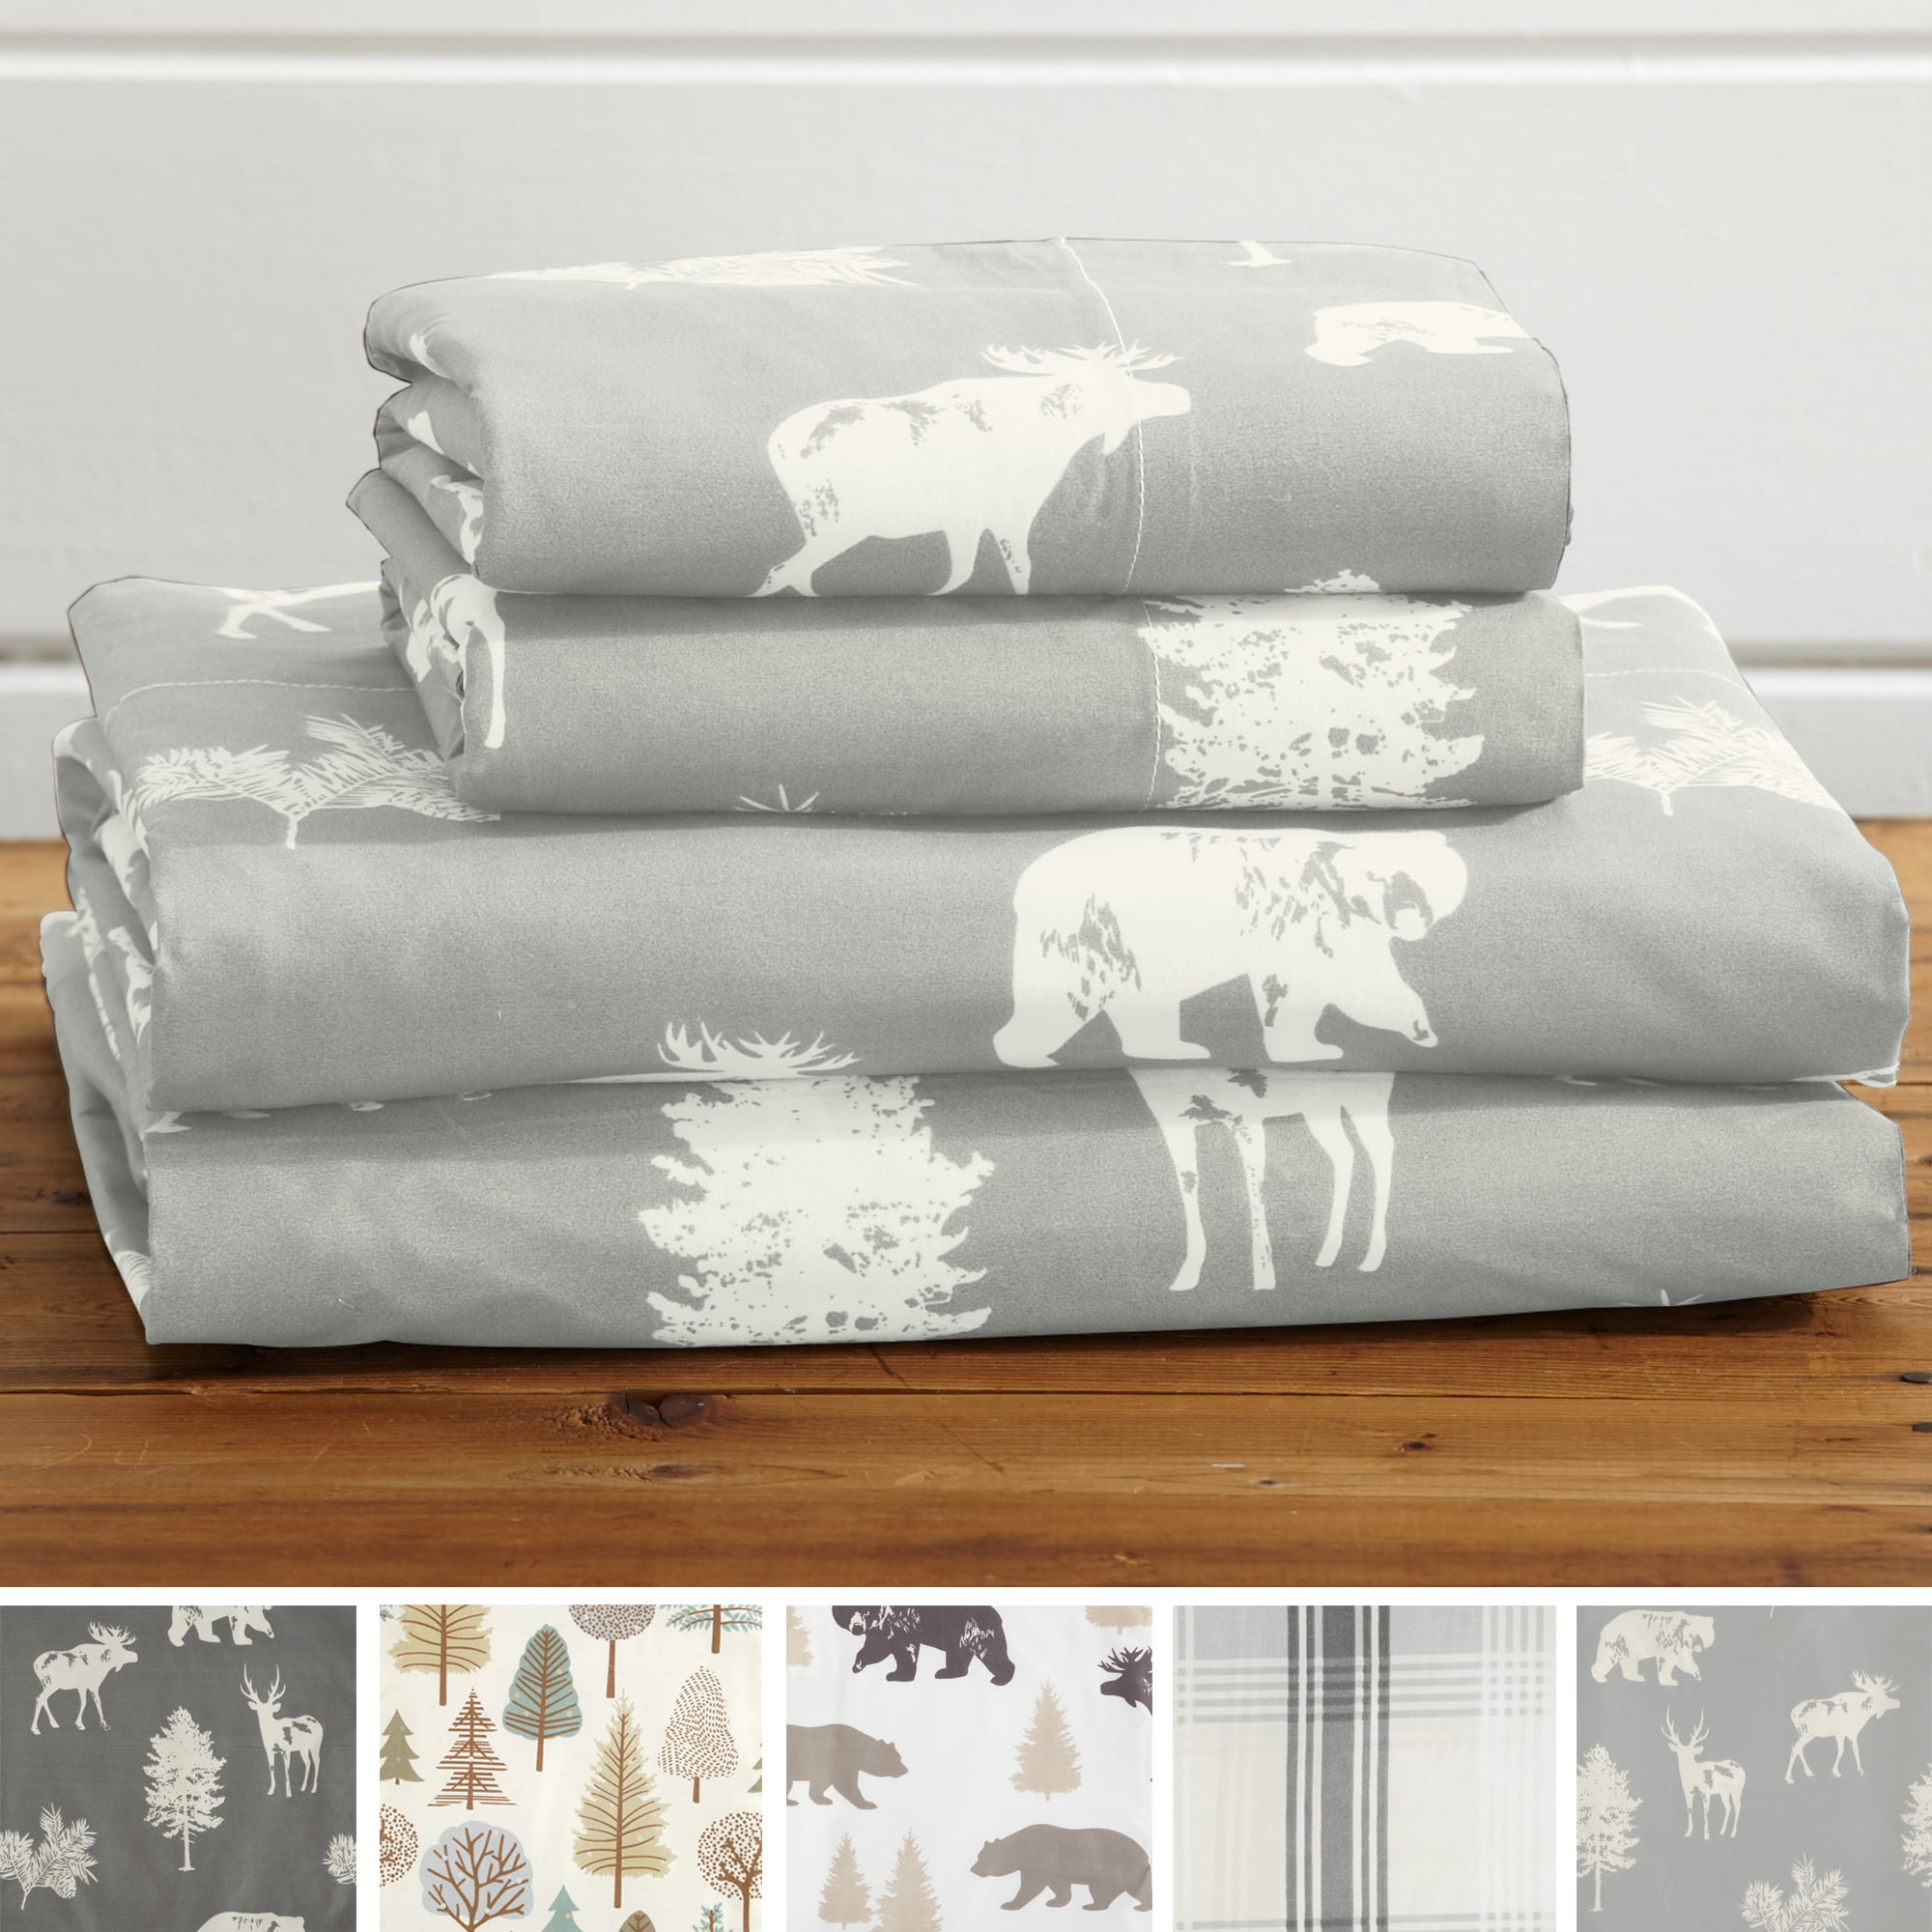 3-Piece Lodge Printed Ultra-Soft Microfiber Sheet Set Beautiful Patterns Drawn from Nature Twin, Forest Animal - Light Grey All-Season Bed Sheets. Comfortable